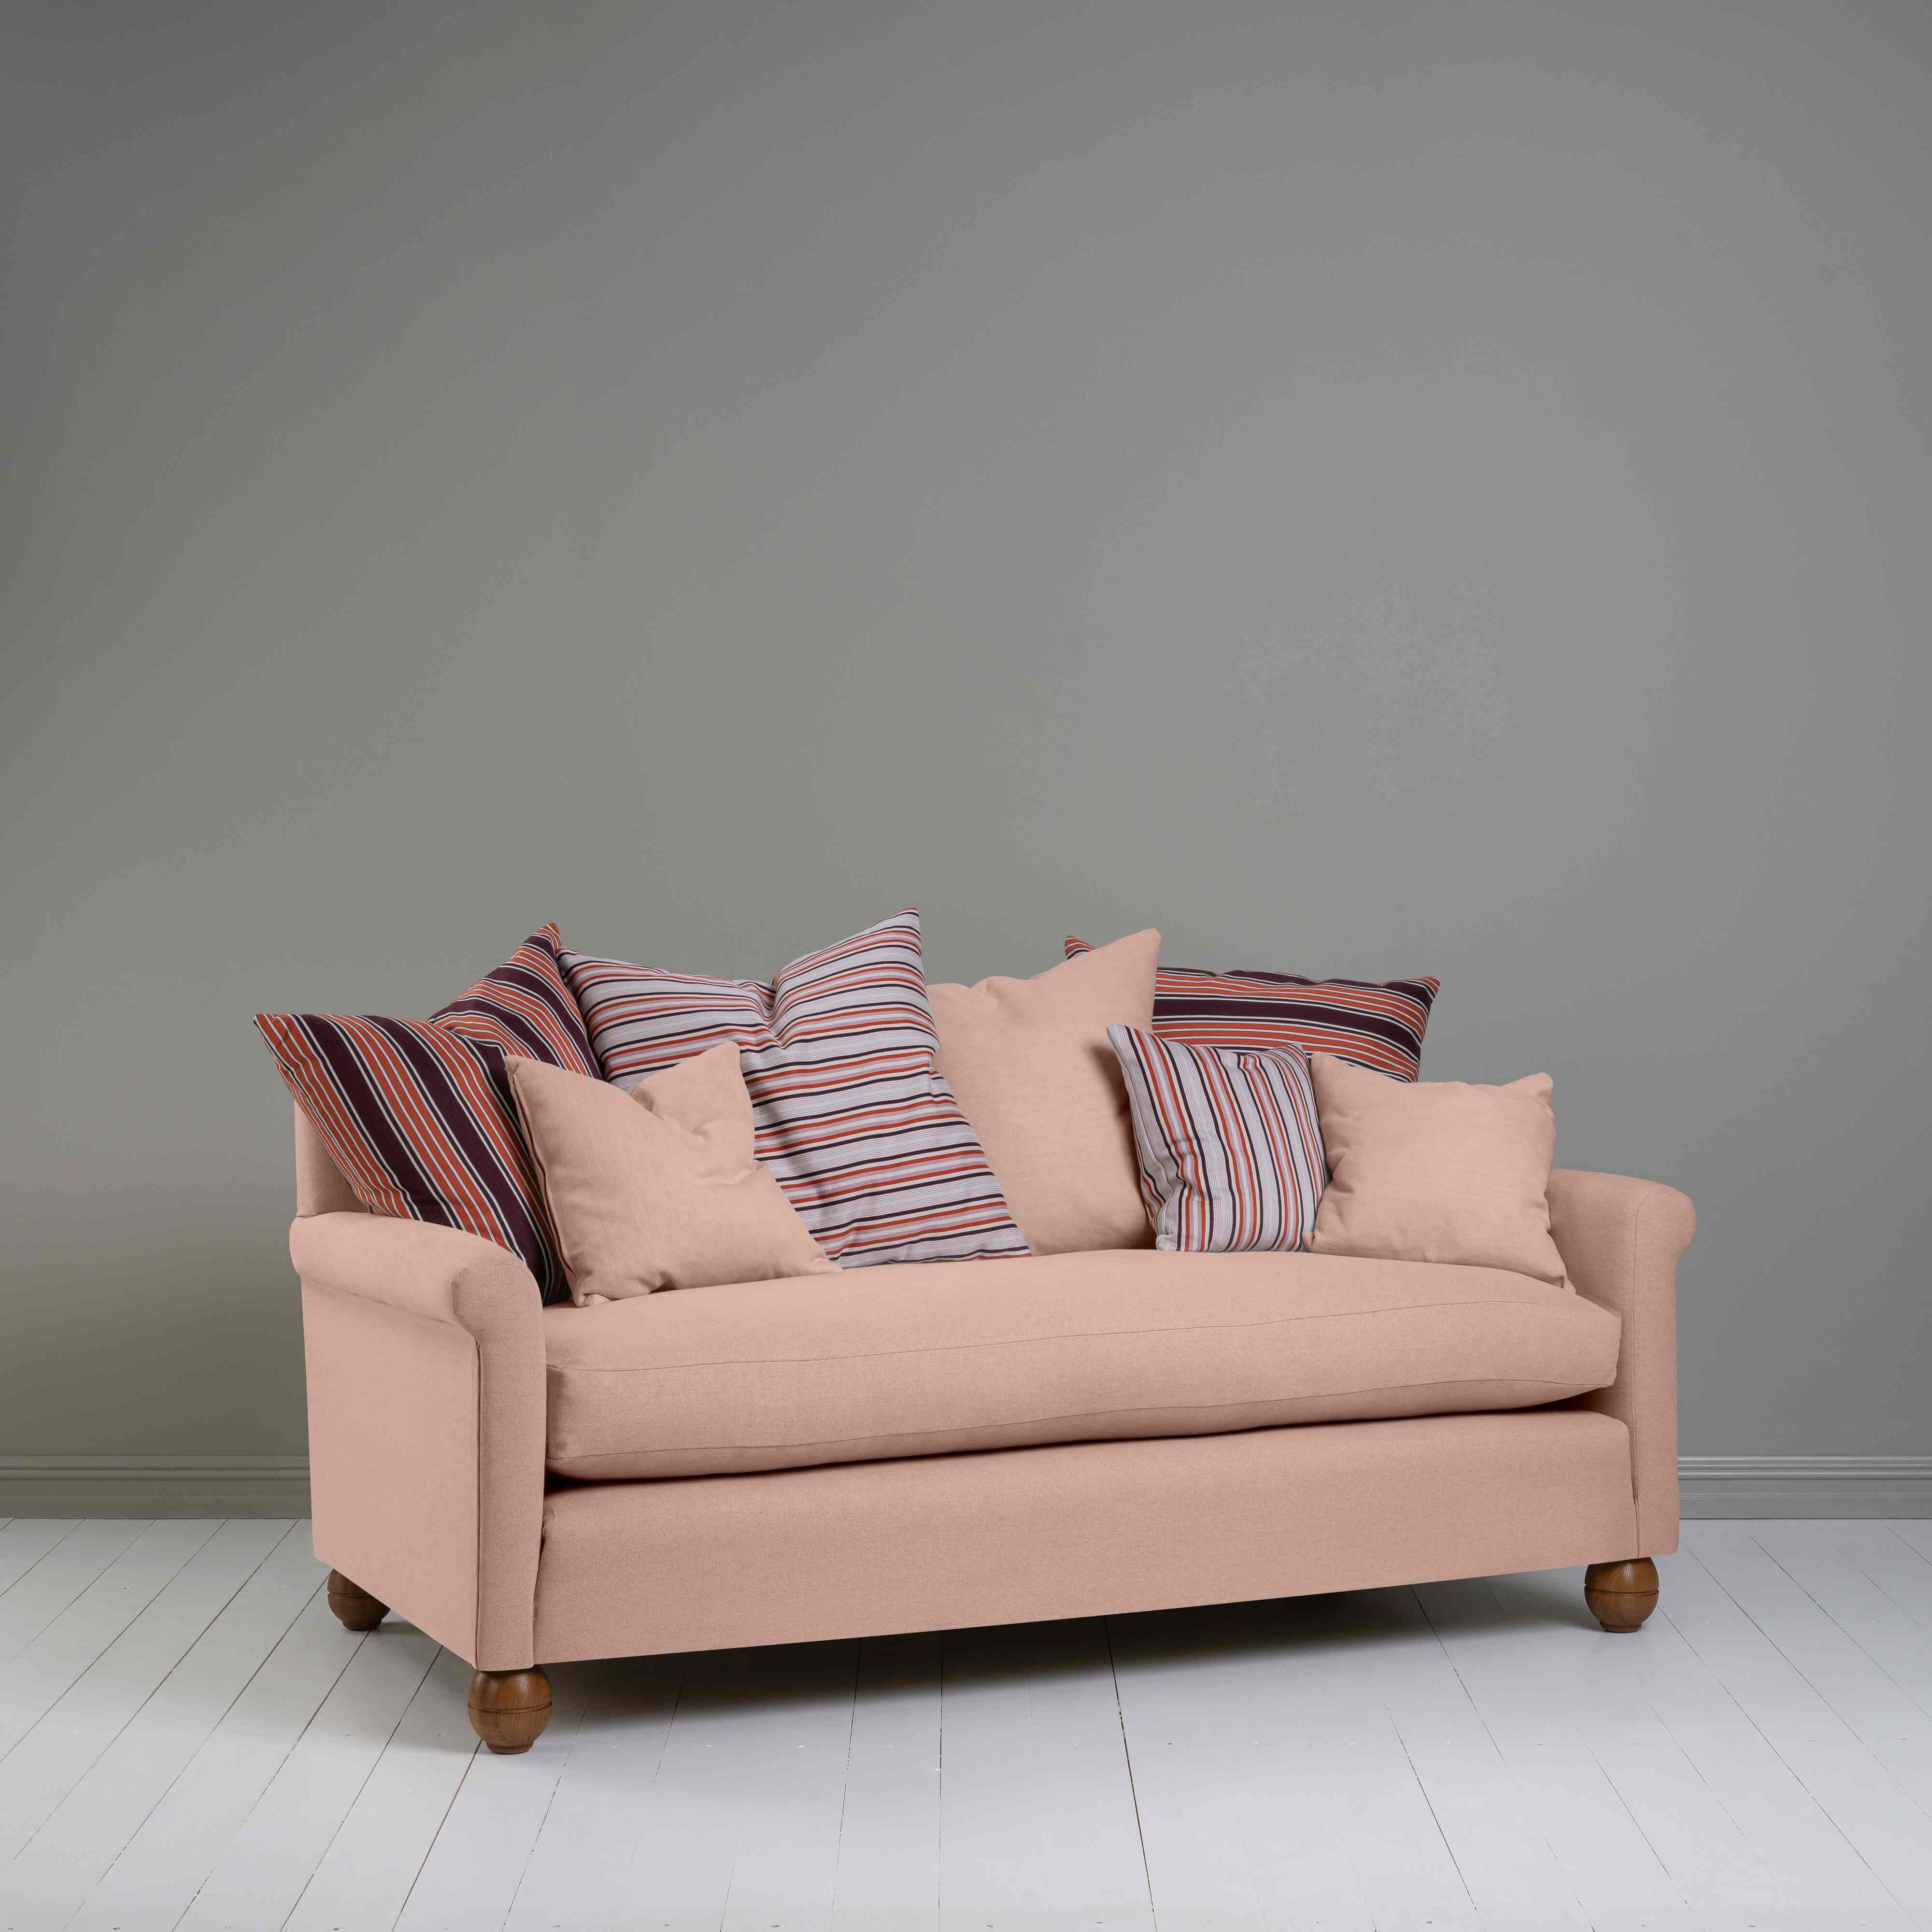  Idler 3 Seater Sofa in Laidback Linen Dusky Pink 